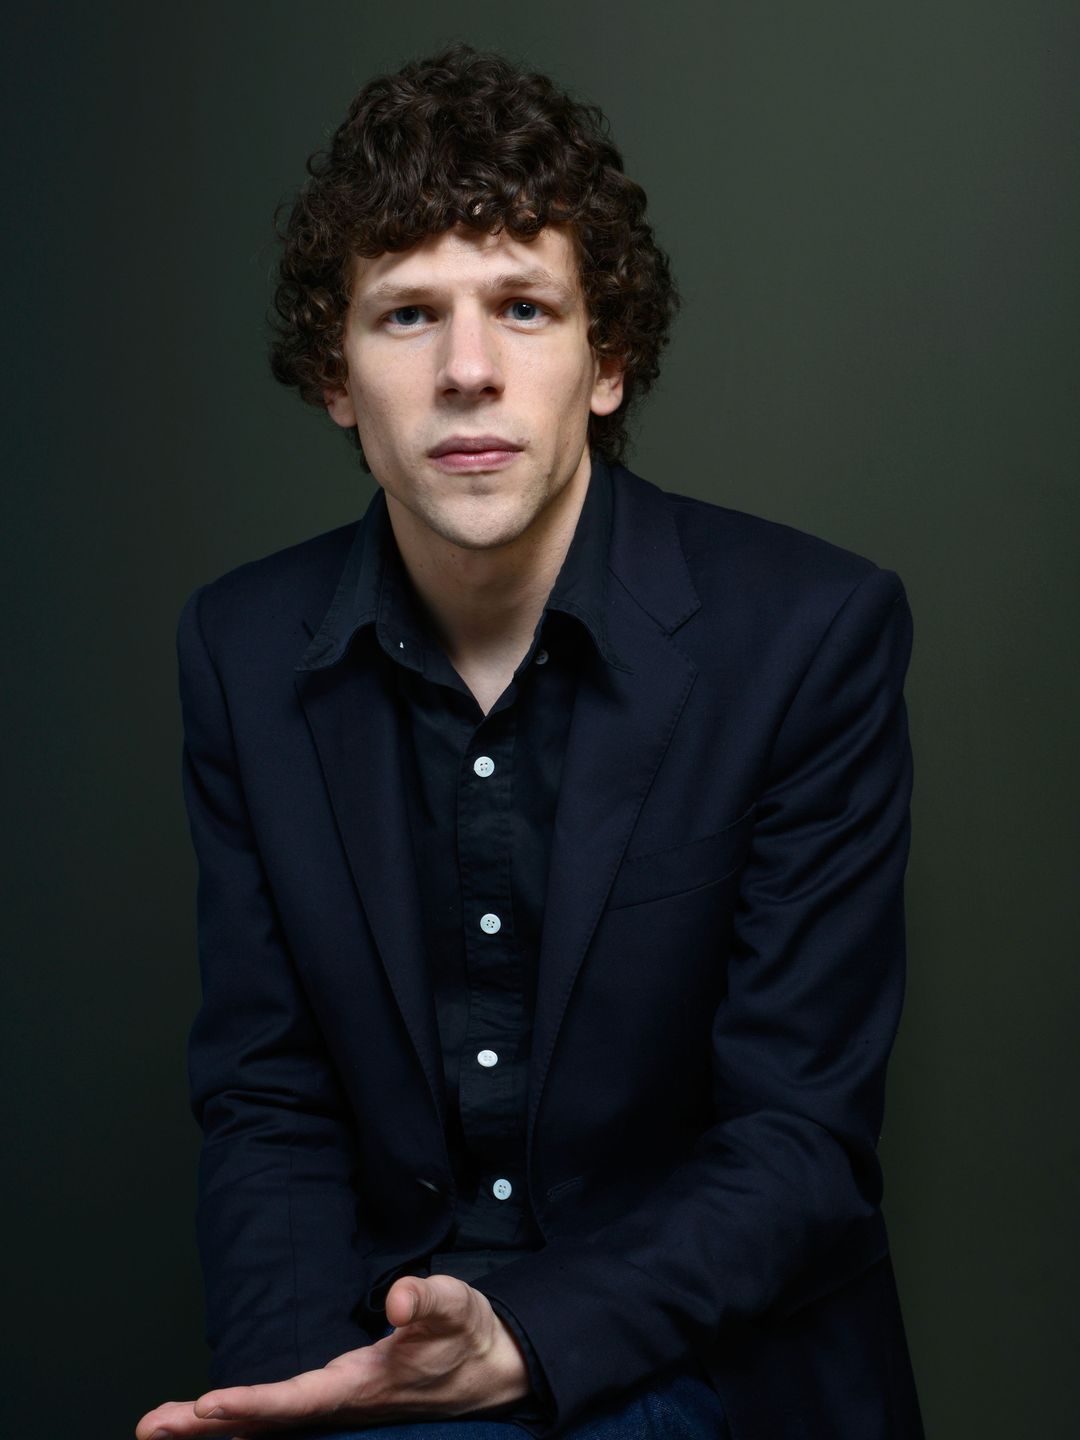 Jesse Eisenberg how did he became famous